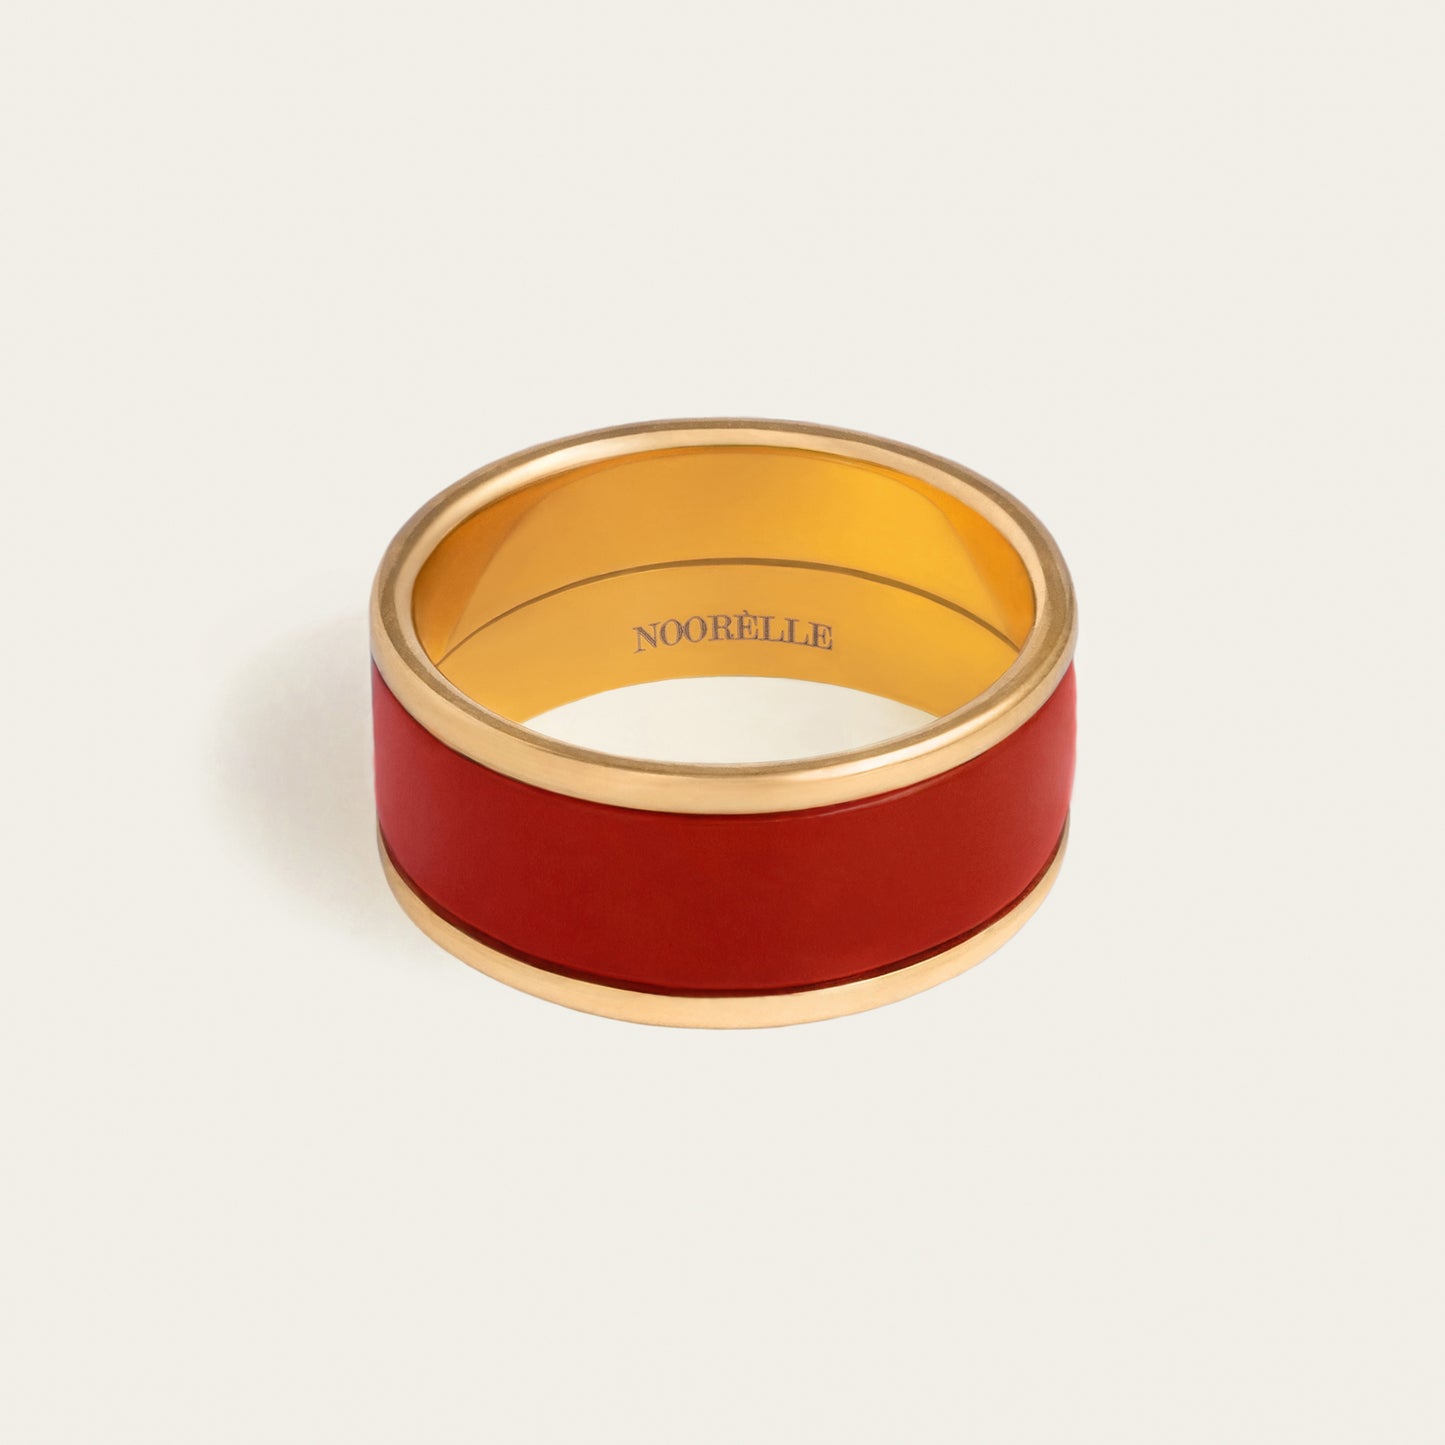 noorelle, monochrome orange ring, jewellery, ring, monochrome ring, ring for girls, gold ring, gold and red  ring